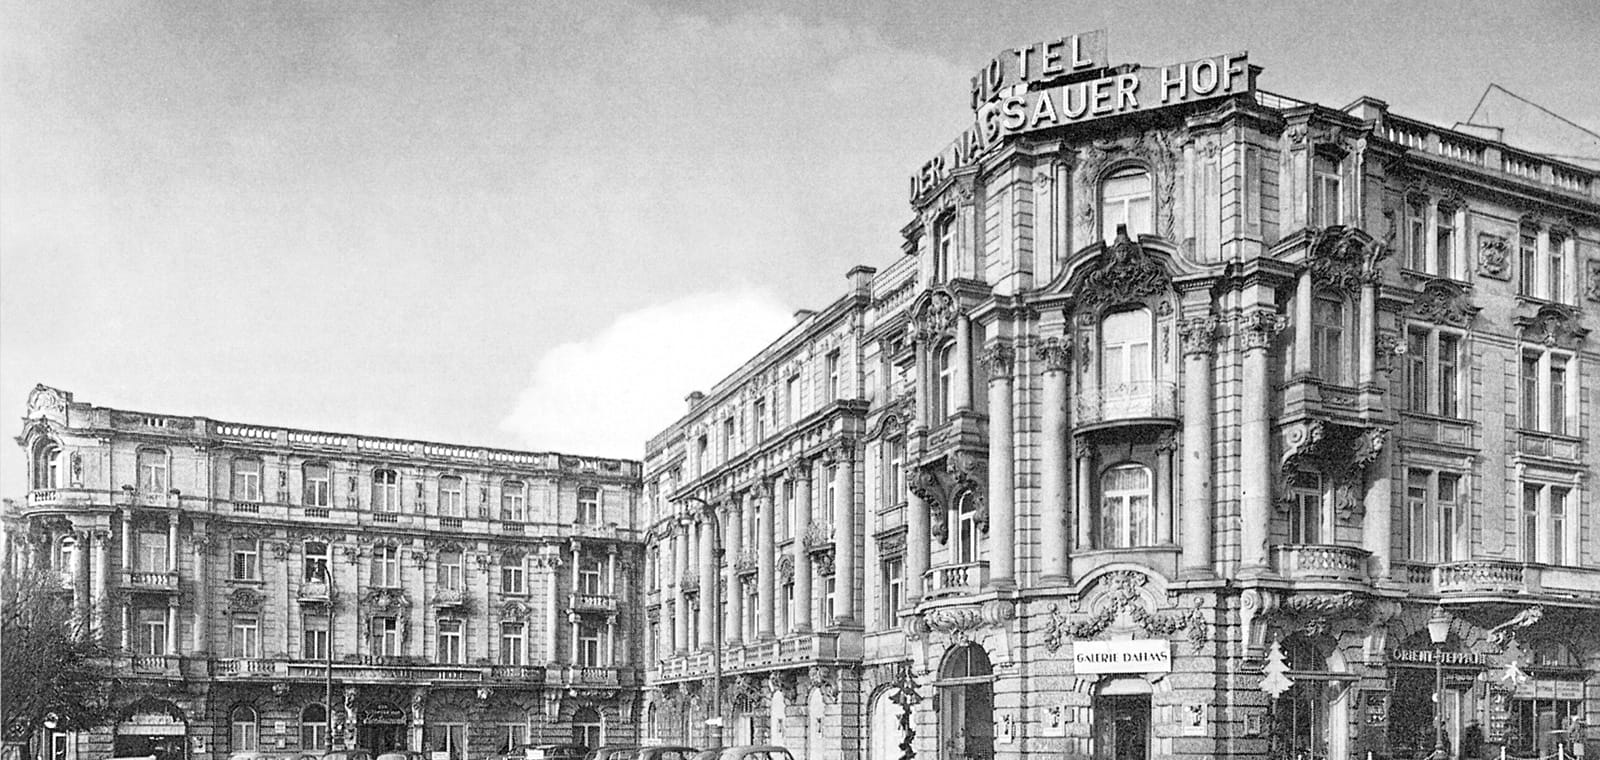 Black and white photo of the exterior of the hotel from the past 